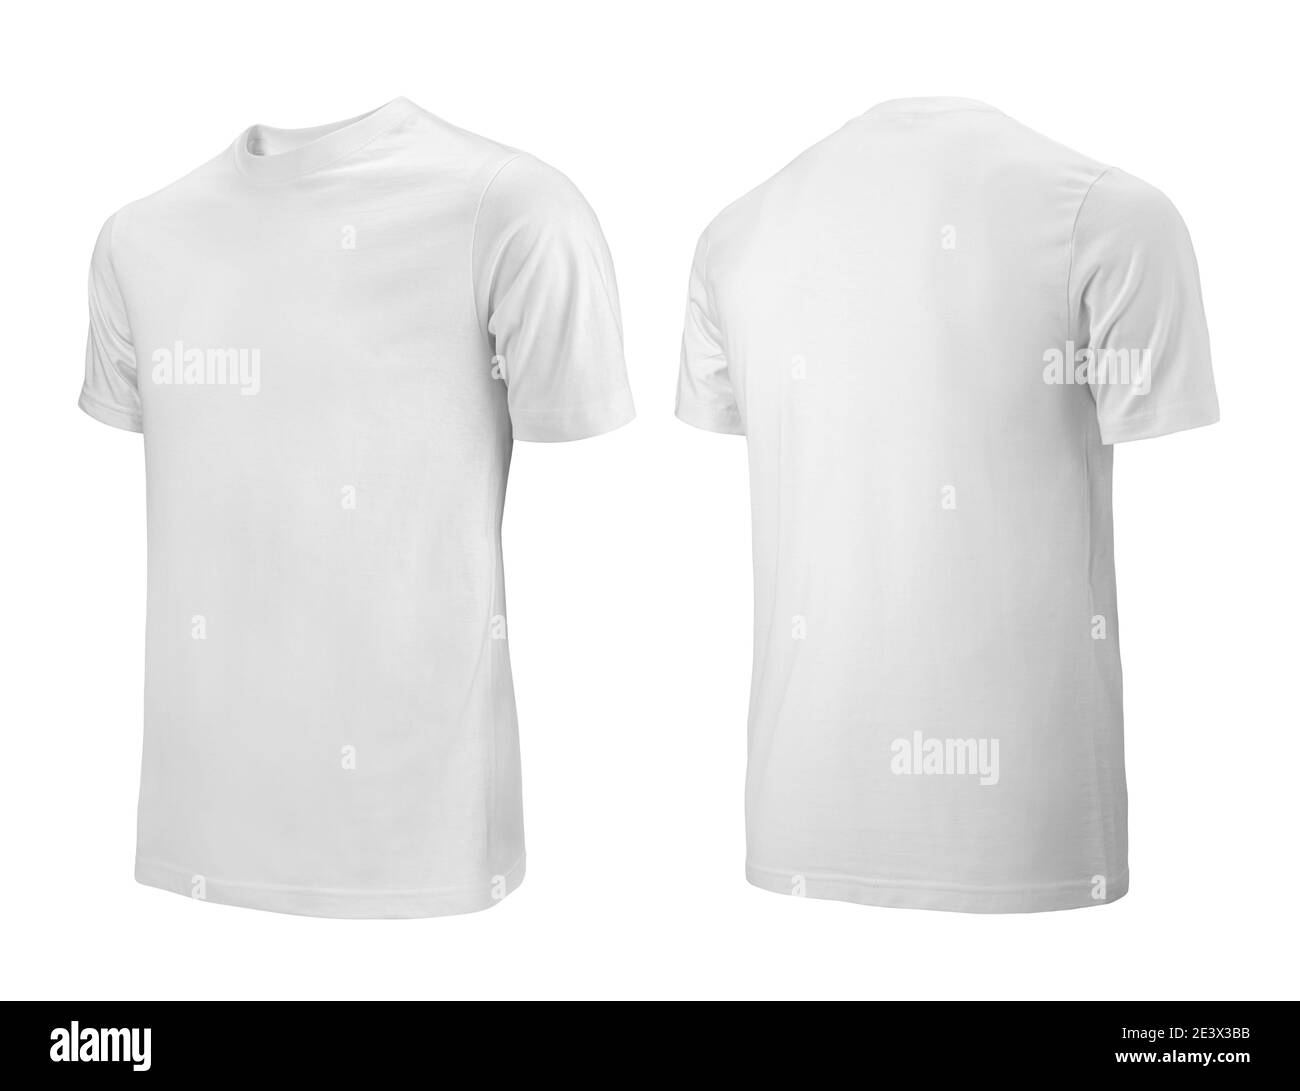 White T-shirts front and back side view used as design template. Stock Photo